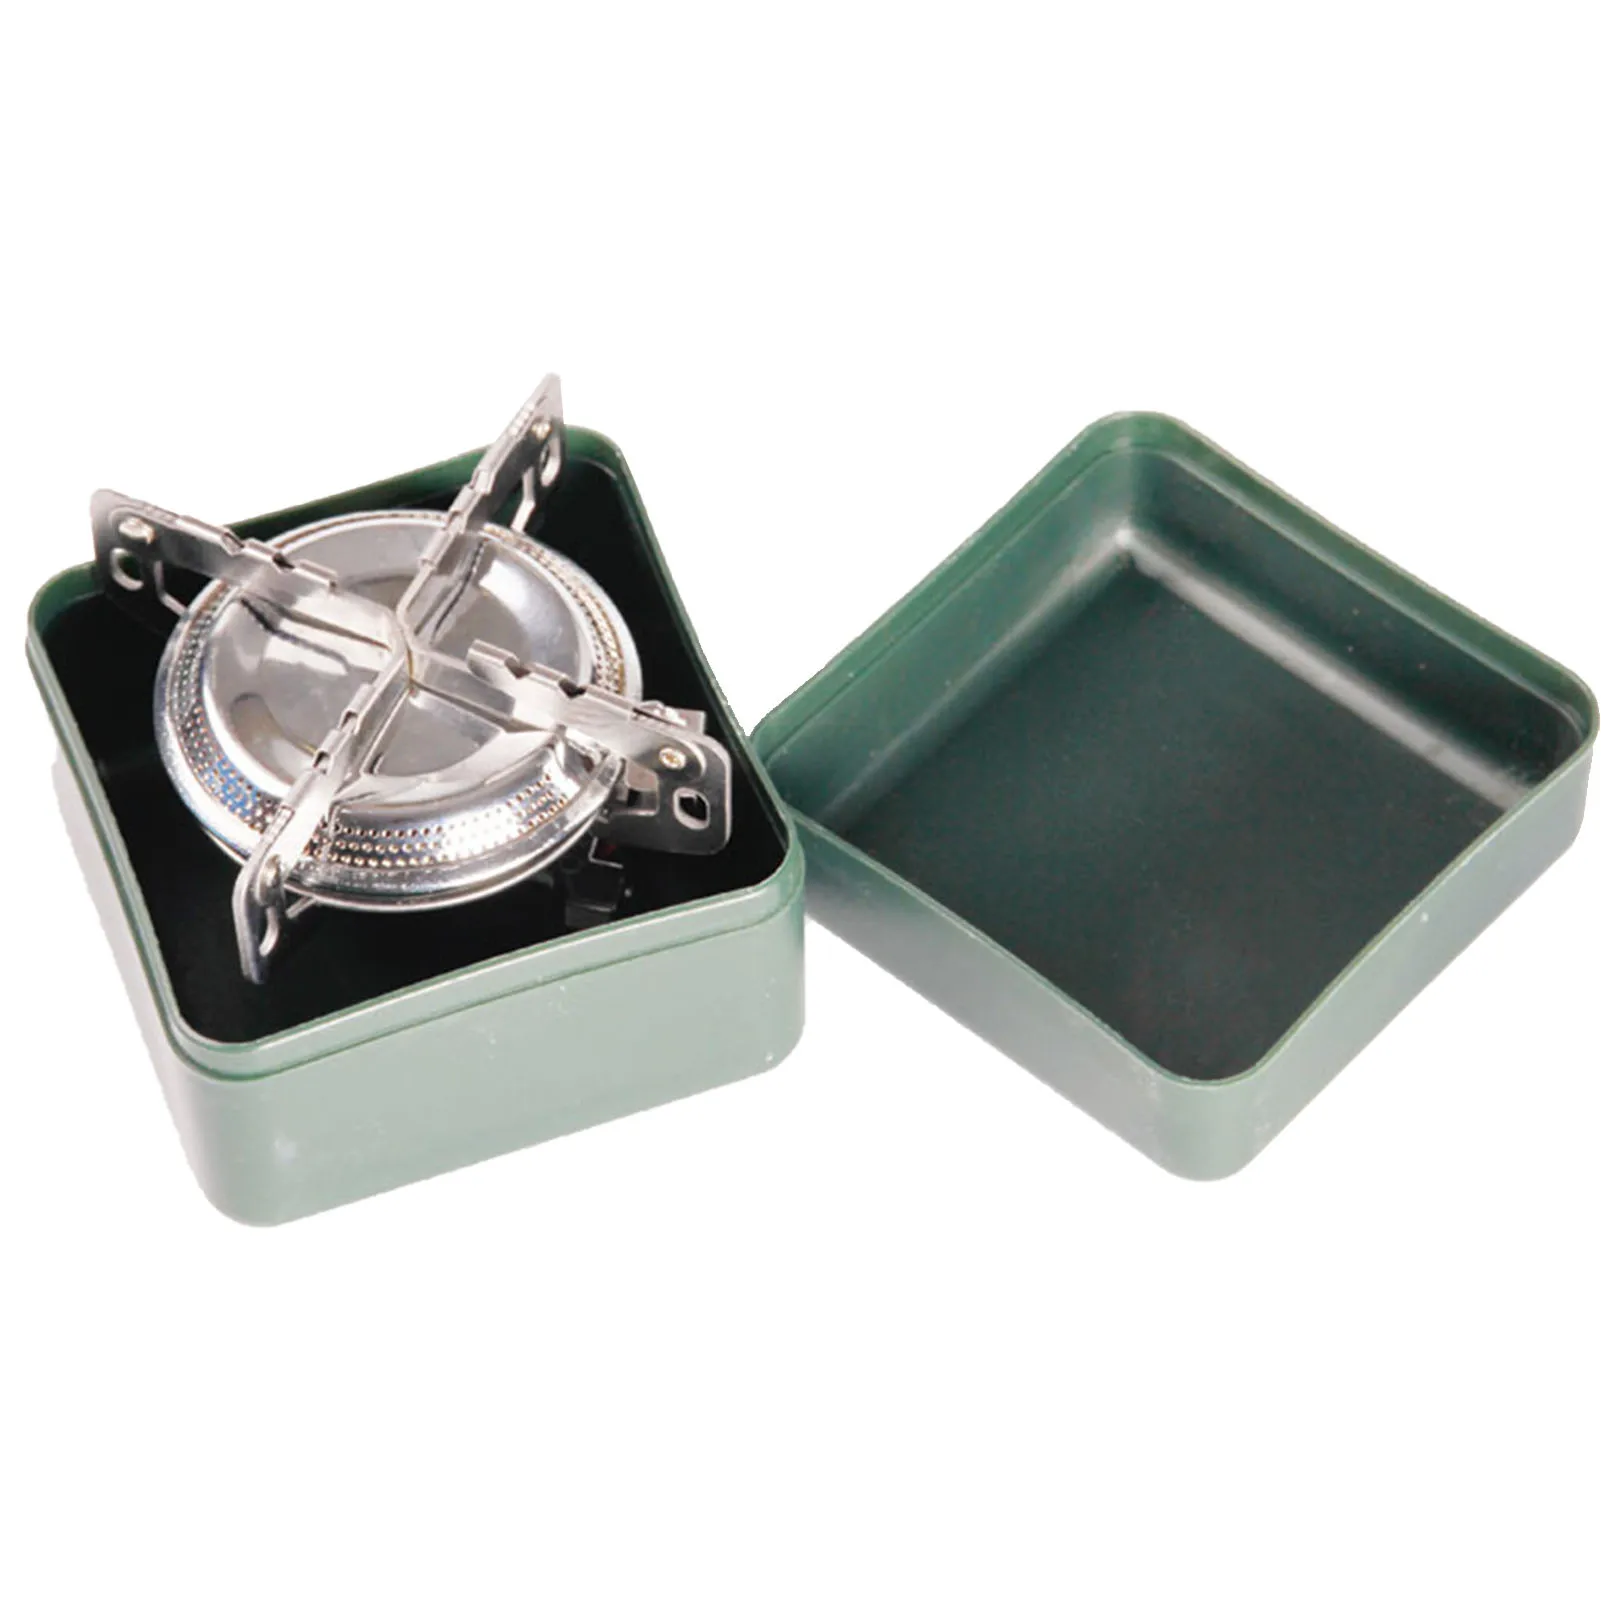 

Picnic Stove Portable 300g-Lightweight Camping And Backpacking Stove Mini Collapsible Stove Burner For Outdoor Backpacking